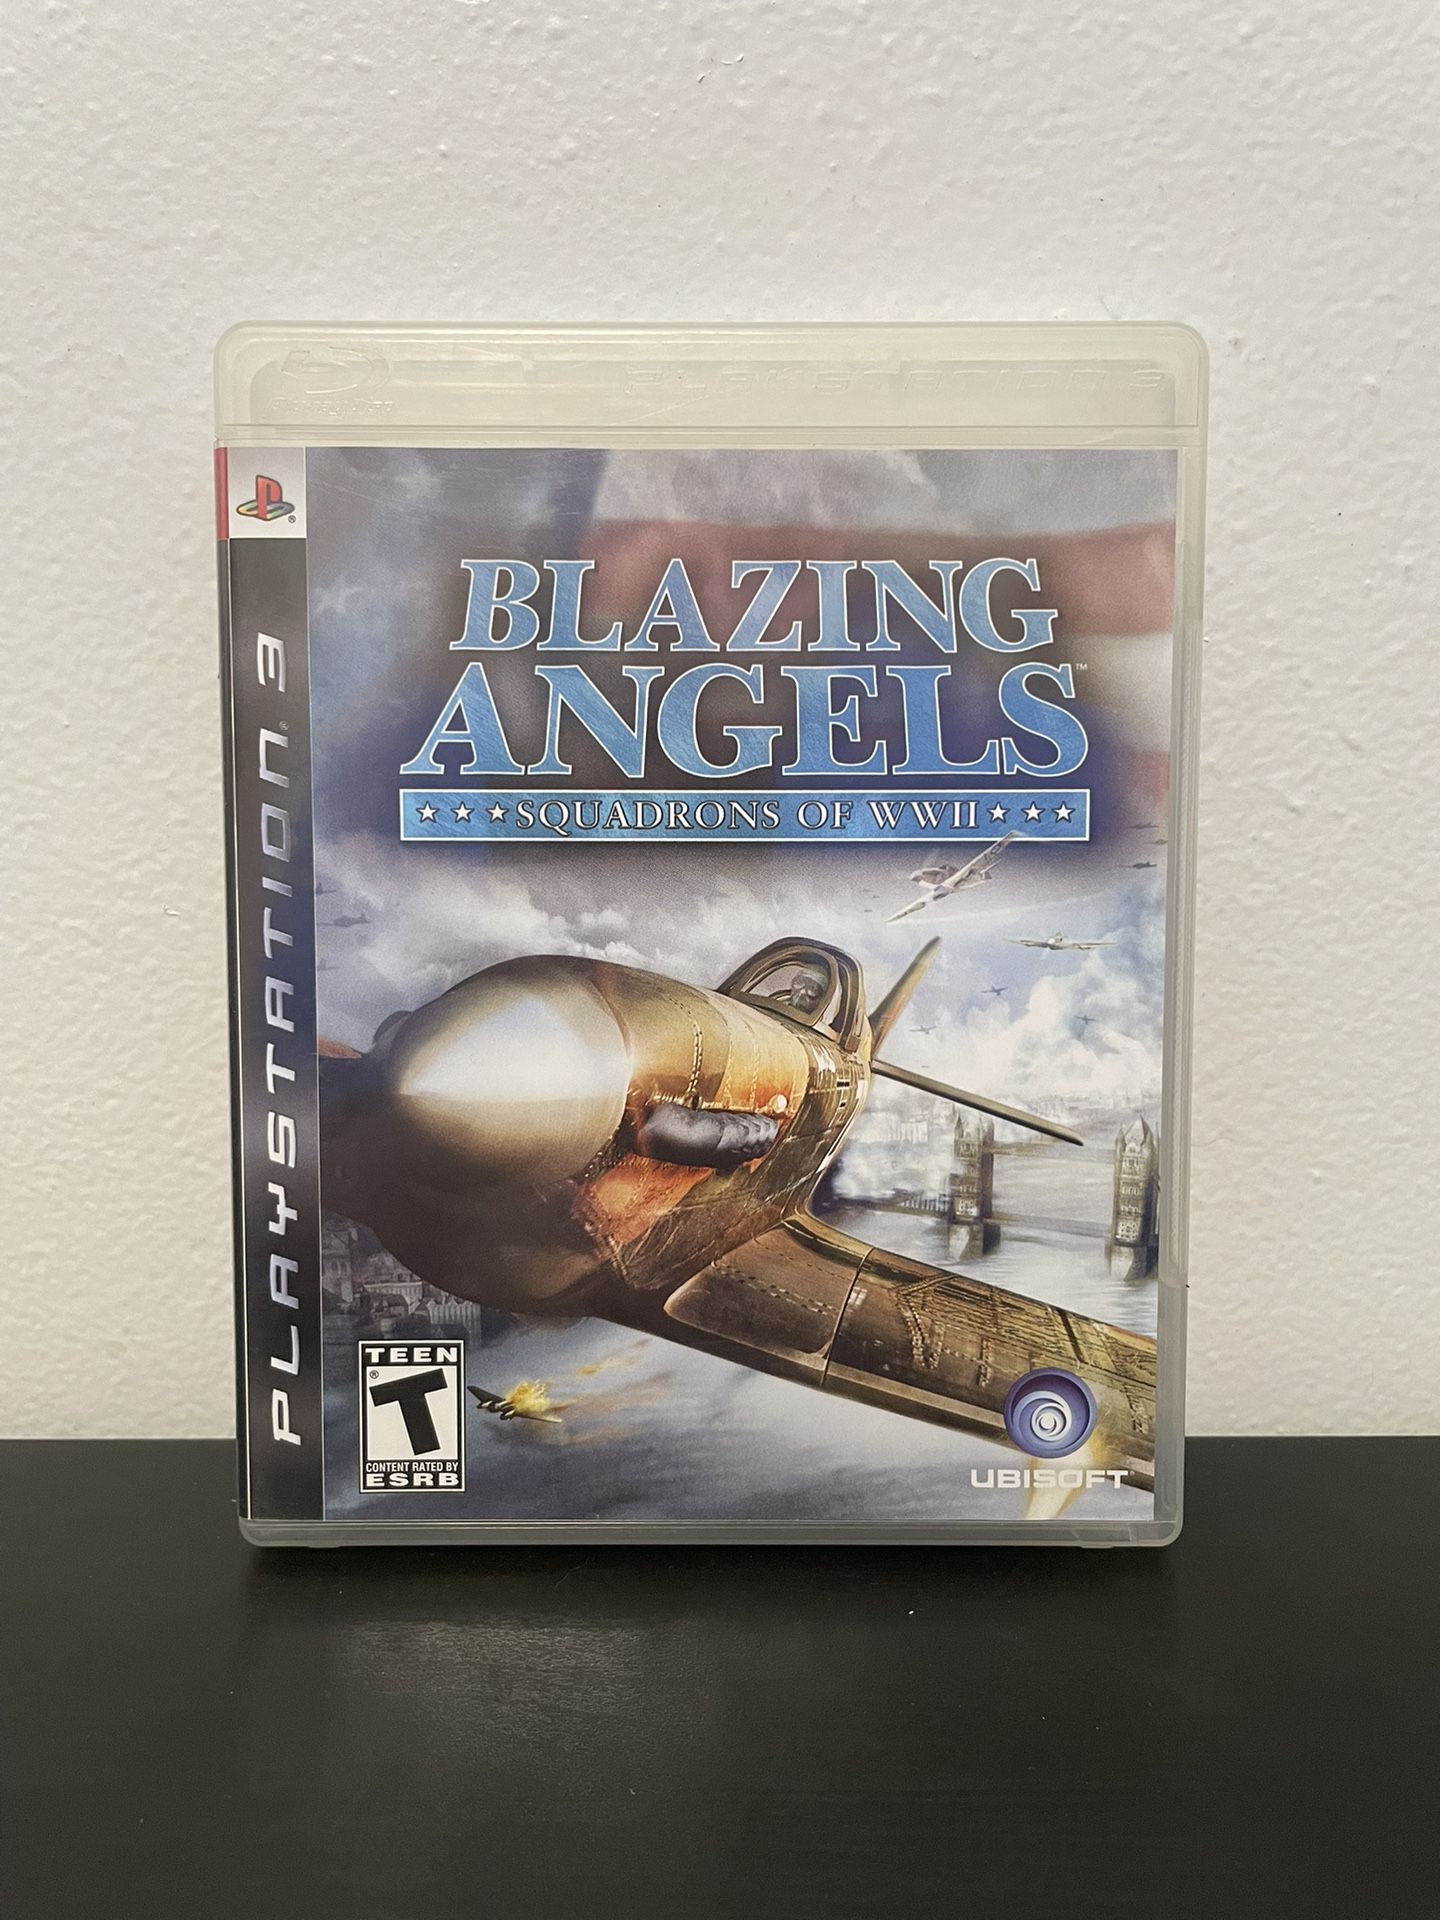 Blazing Angels Squadrons of WWII PS3 PlayStation 3 Like New CIB War Video Game